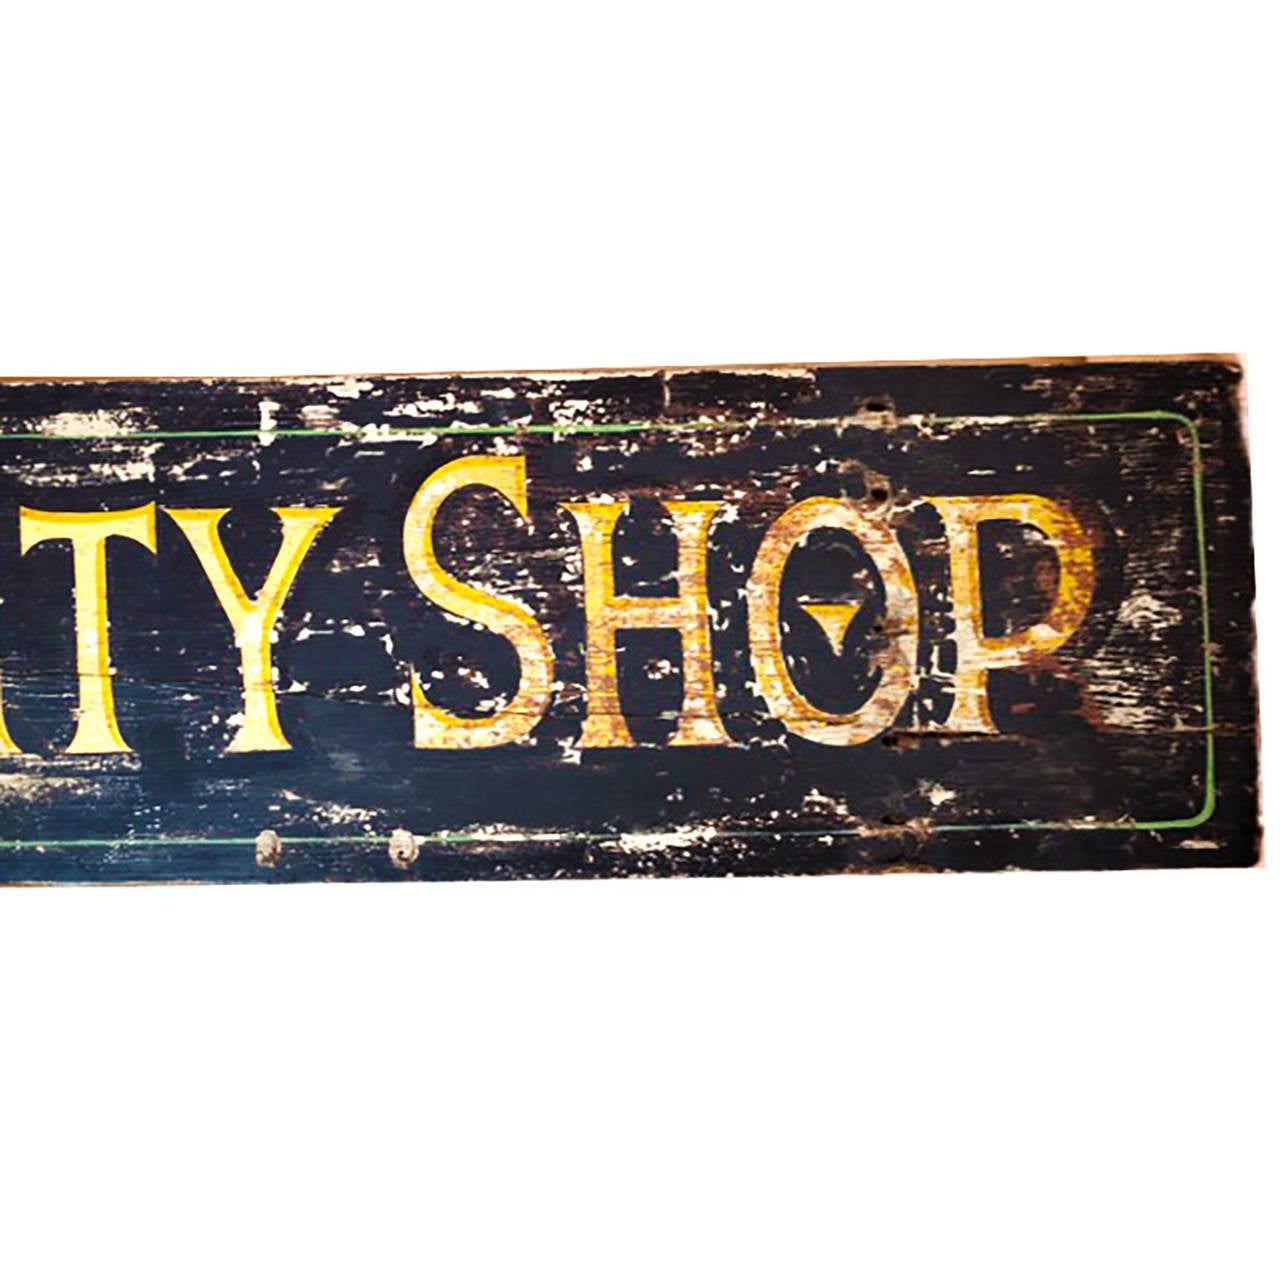 American Early 20th c. Hand-Painted Wooden Beauty Shop Sign